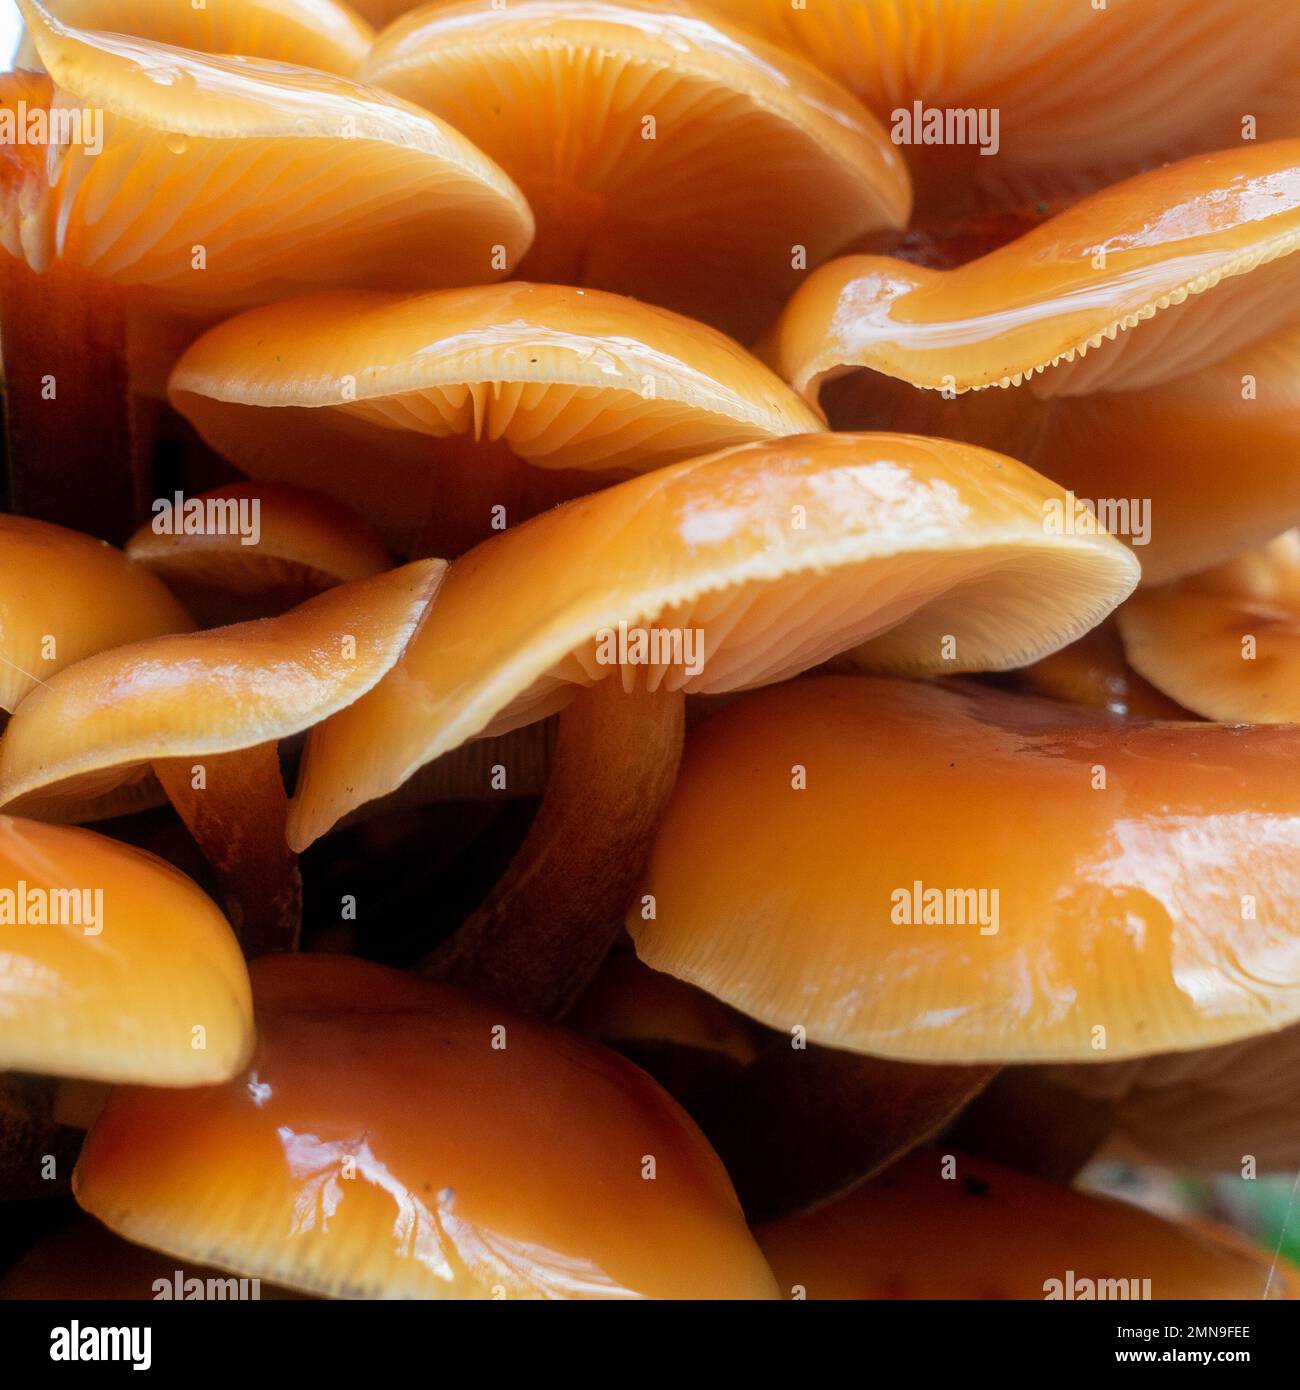 Stunning group of edible Velvet shank fungus Flammulina velutipes growing on dead wood of a tree stump with view of the top of the slimy orange caps. Stock Photo